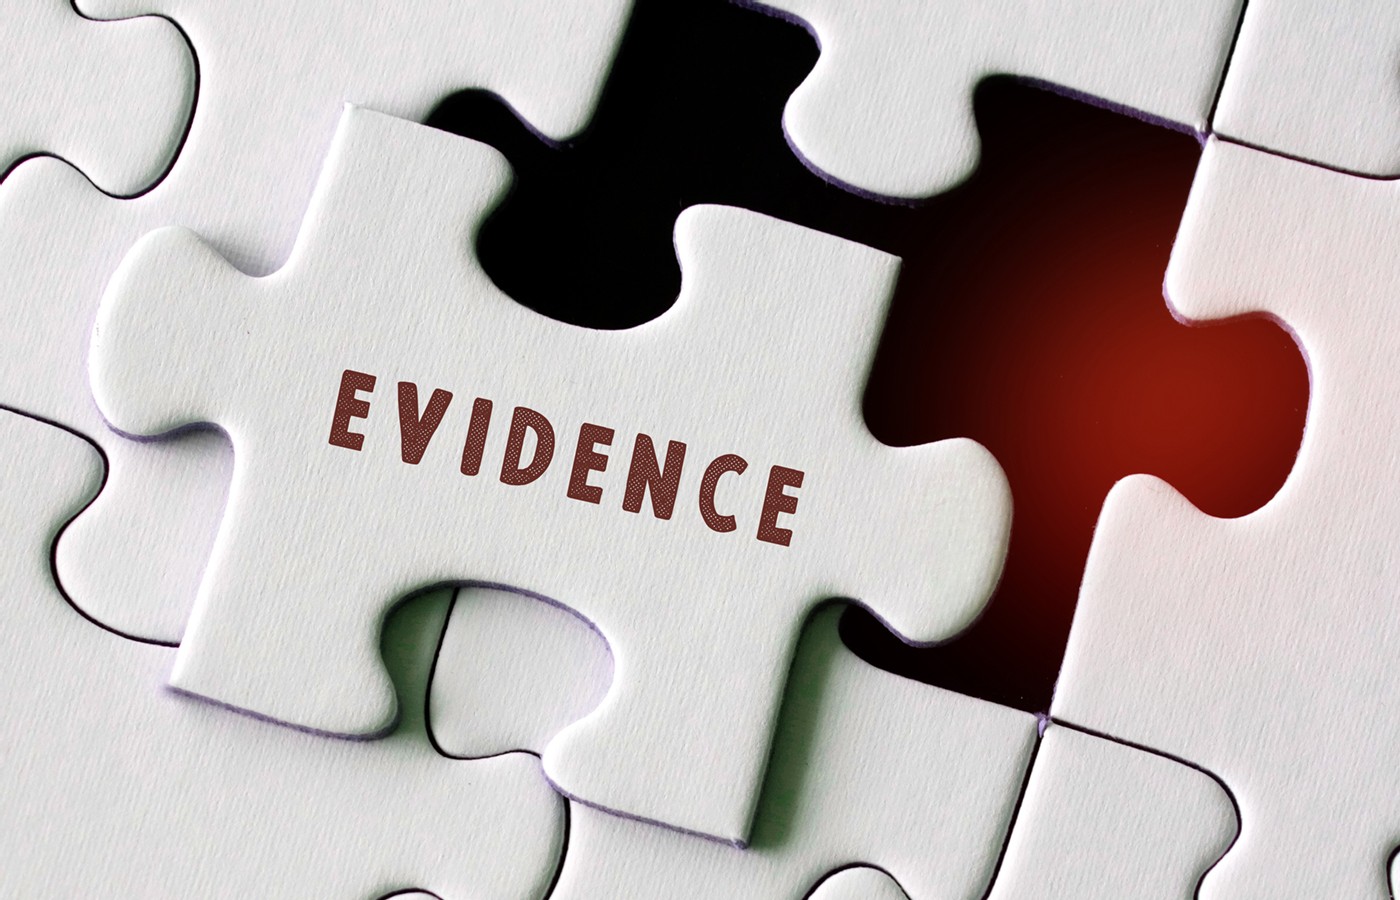 How Much Evidence Is There in 'Evidence-Based Medicine'?